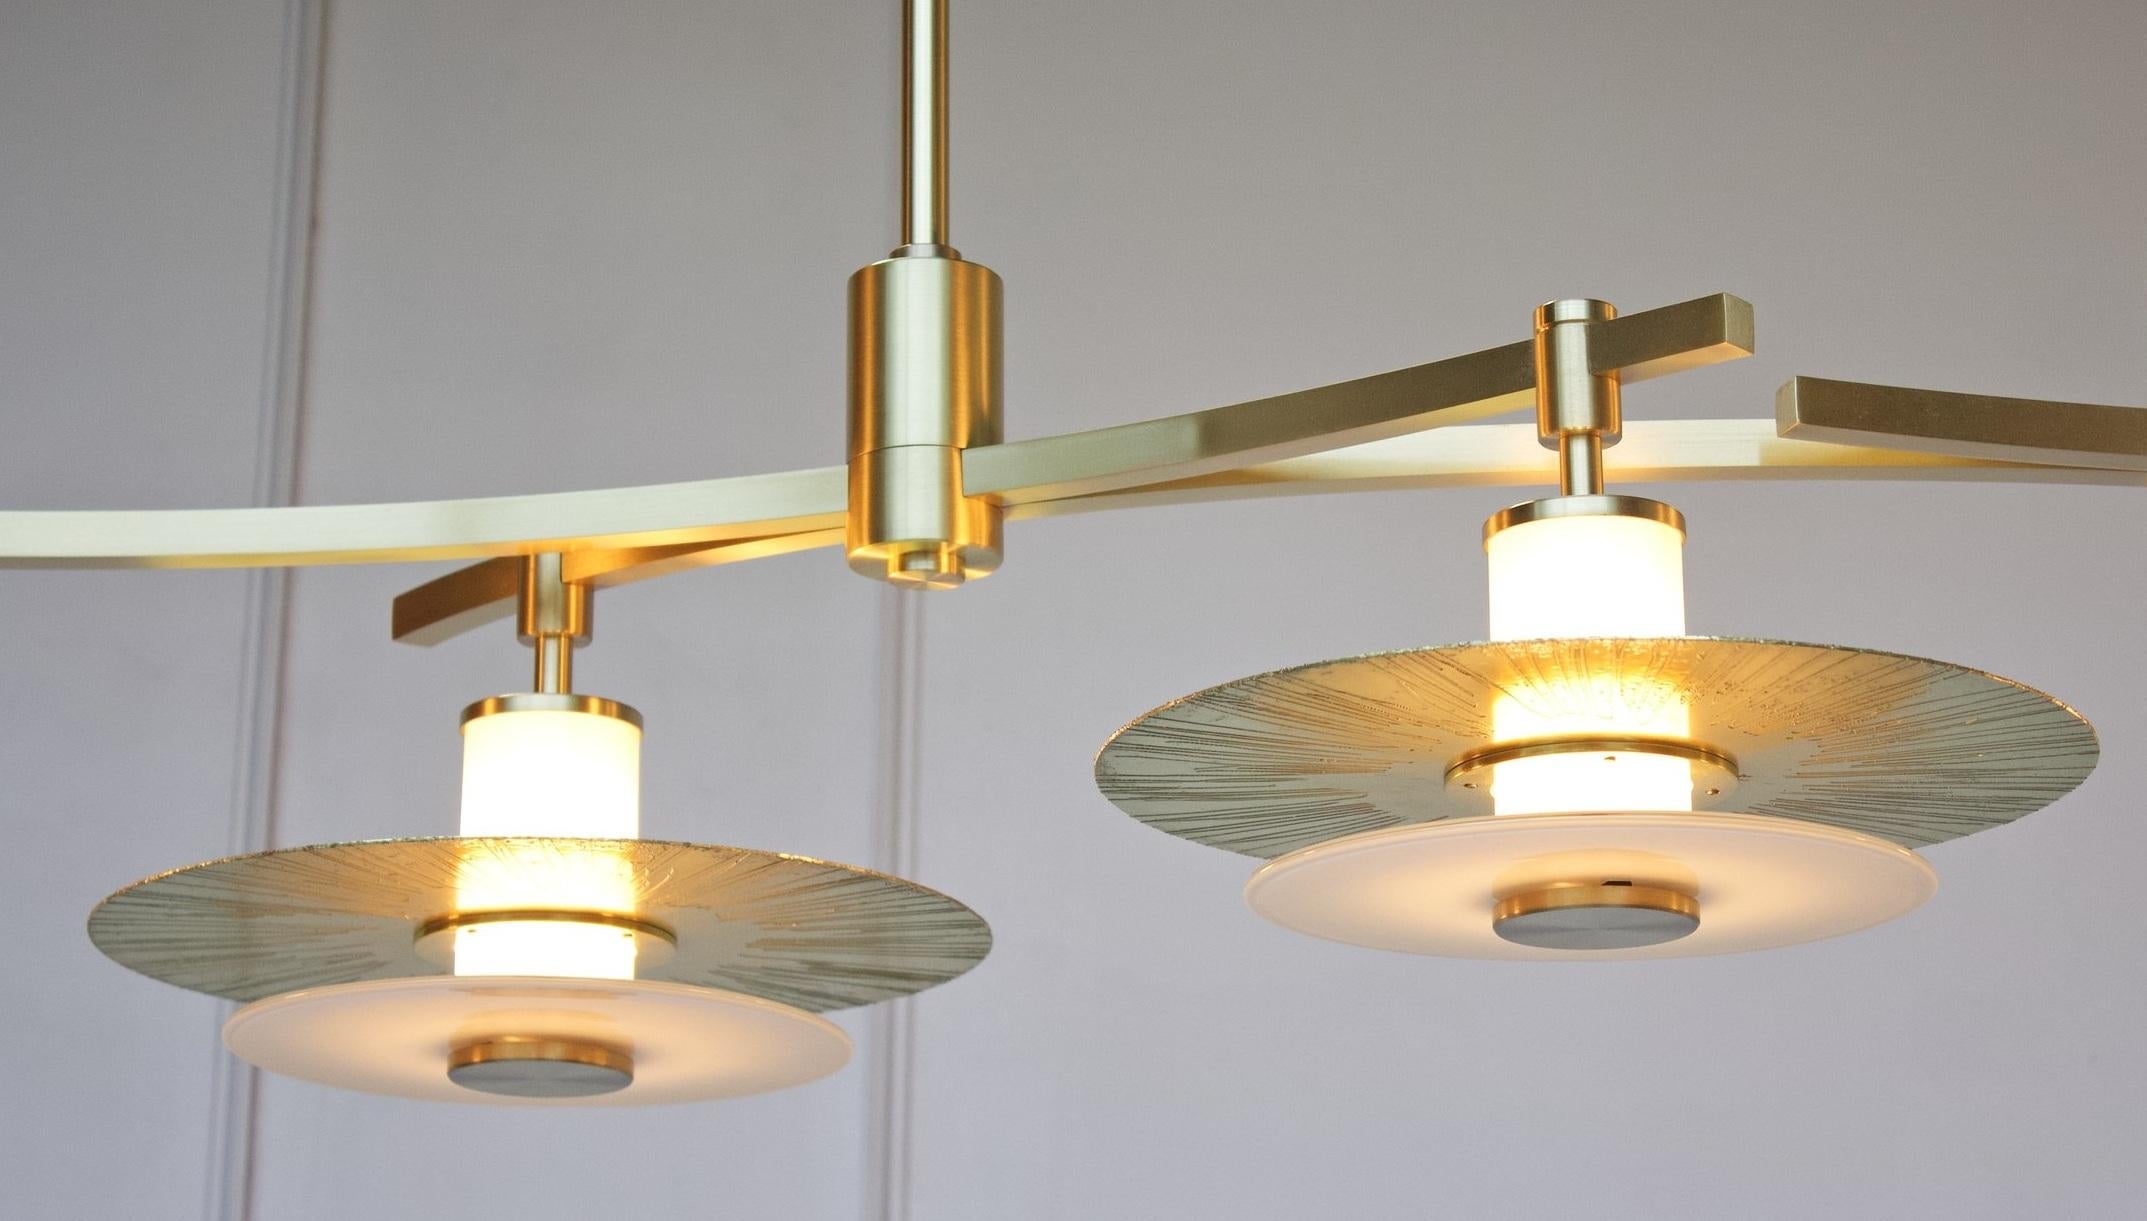 The Klein Chandelier embraces a linear series of layered light assemblies comprising hand blown glass rondelles and etched and polished brass discs. Mounted to a central white light tube, the Klein Chandelier offers ample up lighting as well as a